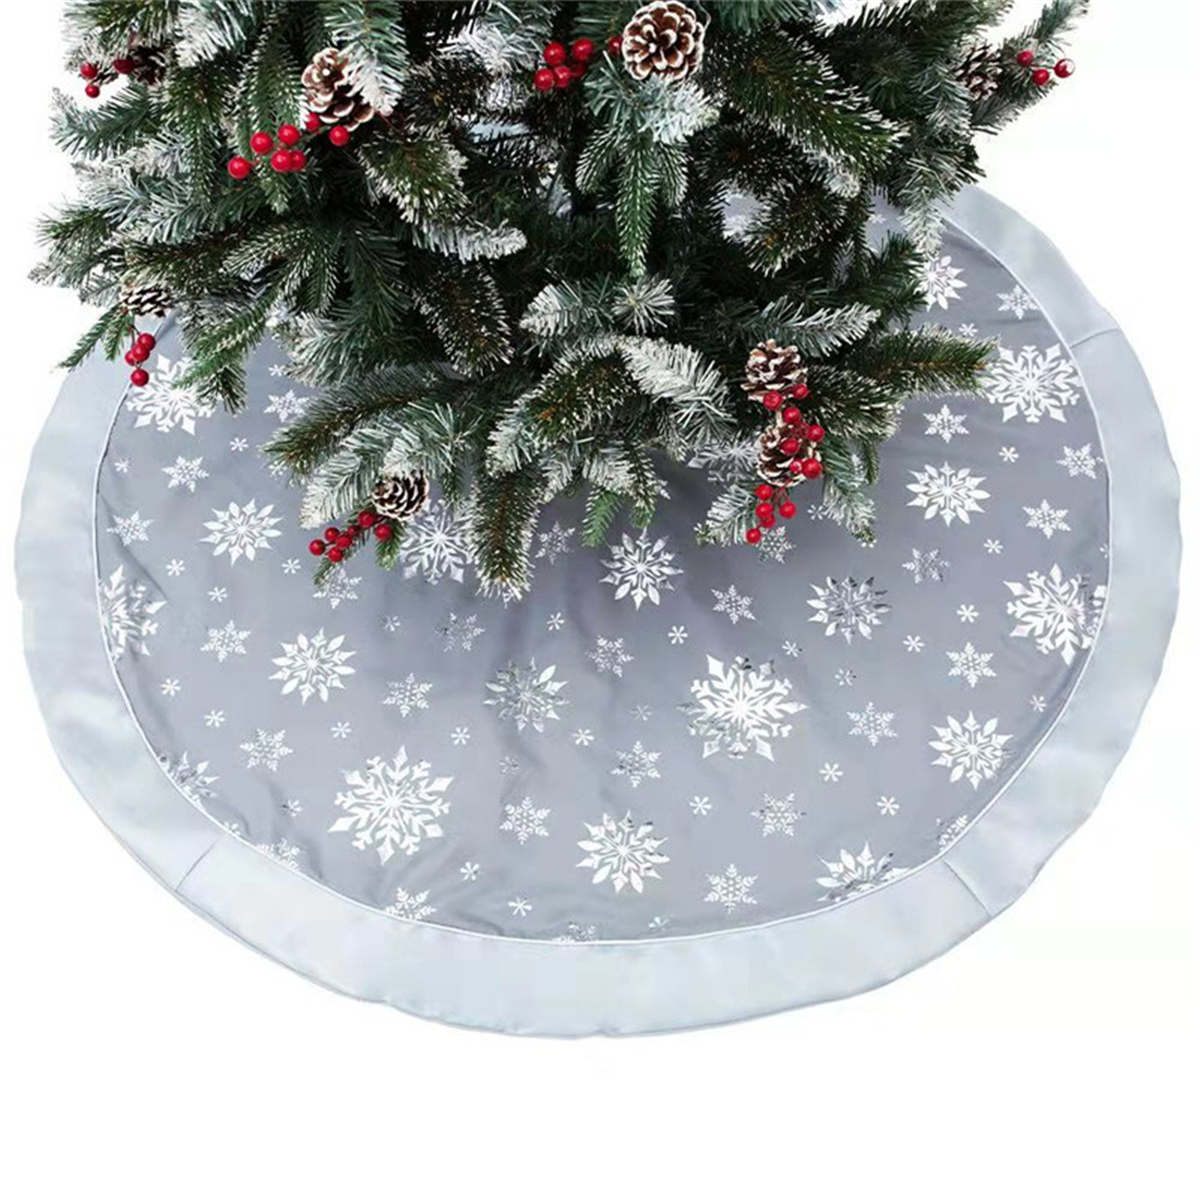 120cm-Stitched-Santa-Christmas-Snowflake-Skir-Tree-Skirt-for-Home-New-Year-2020-Christmas-Fancy-Deco-1770958-10